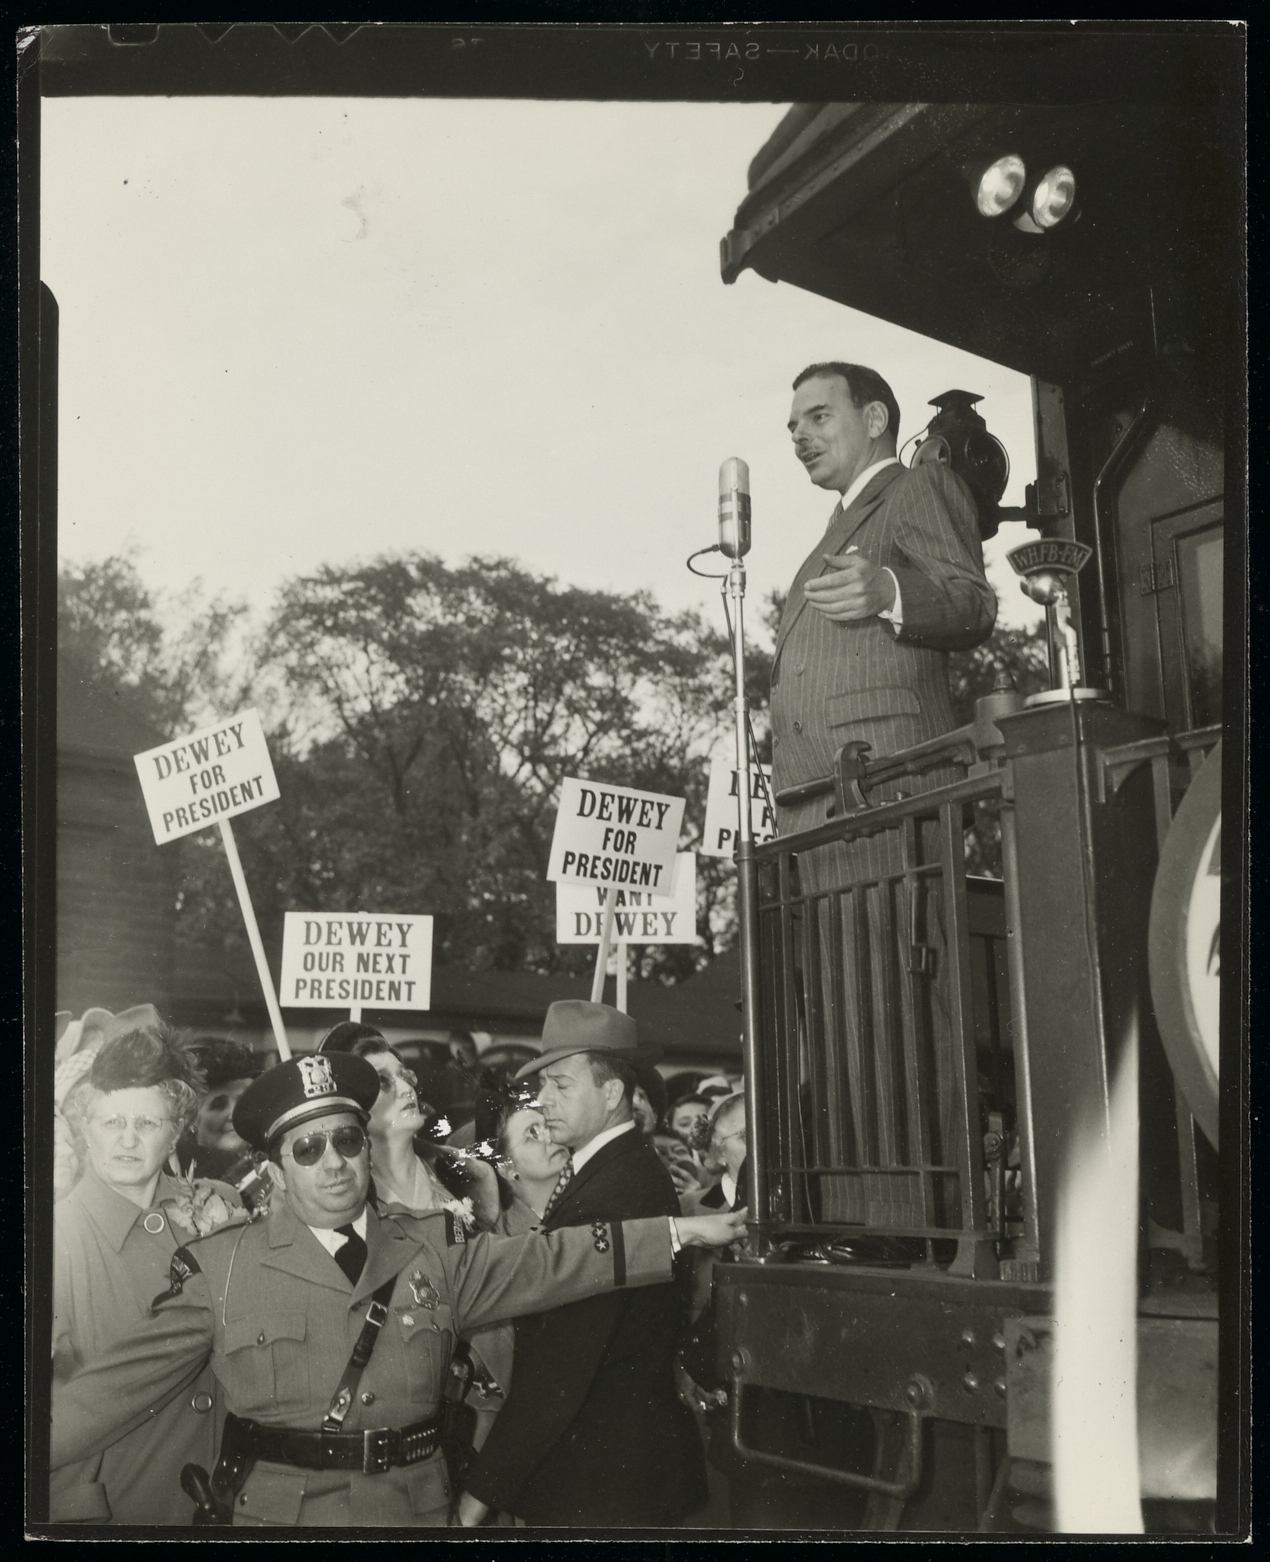 Photograph of Thomas E. Dewey from the 1948 Presidential Campaign